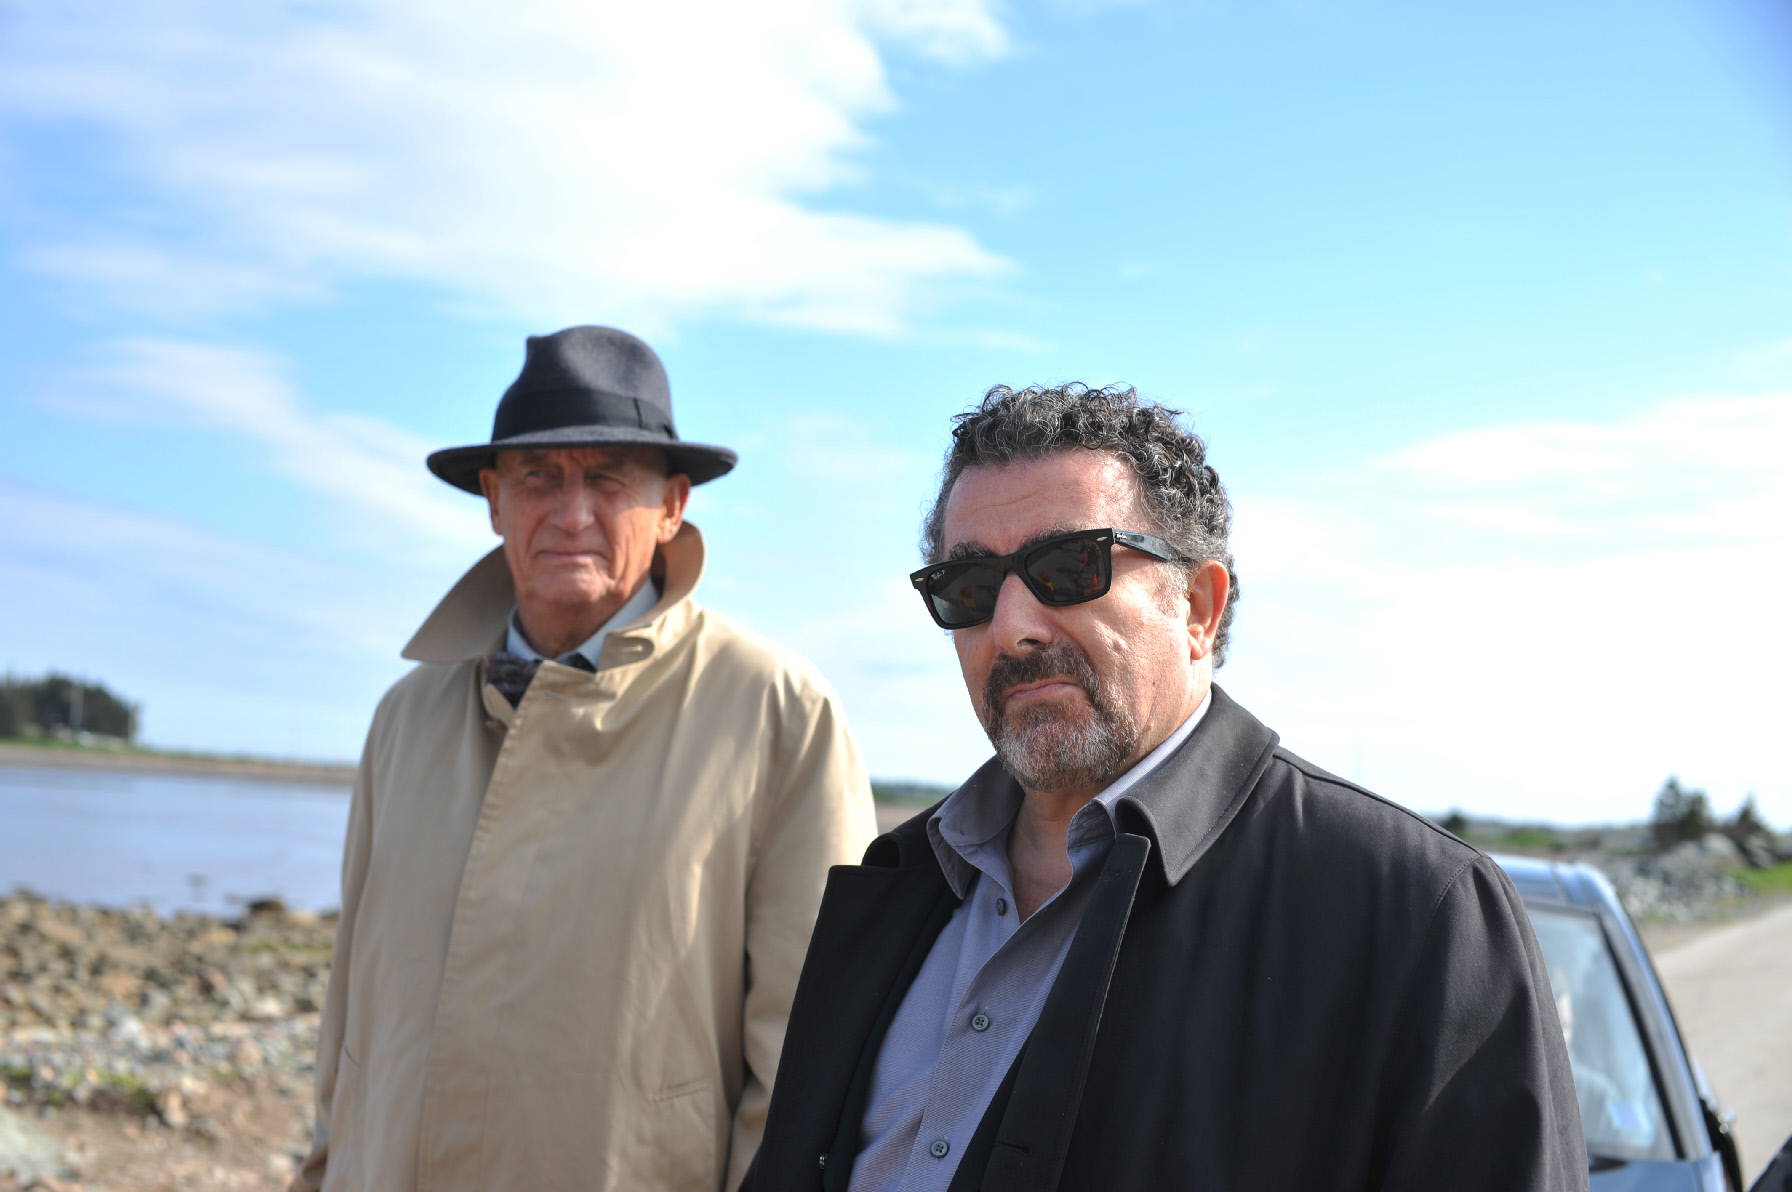 Jesse Stone: Benefit of the Doubt